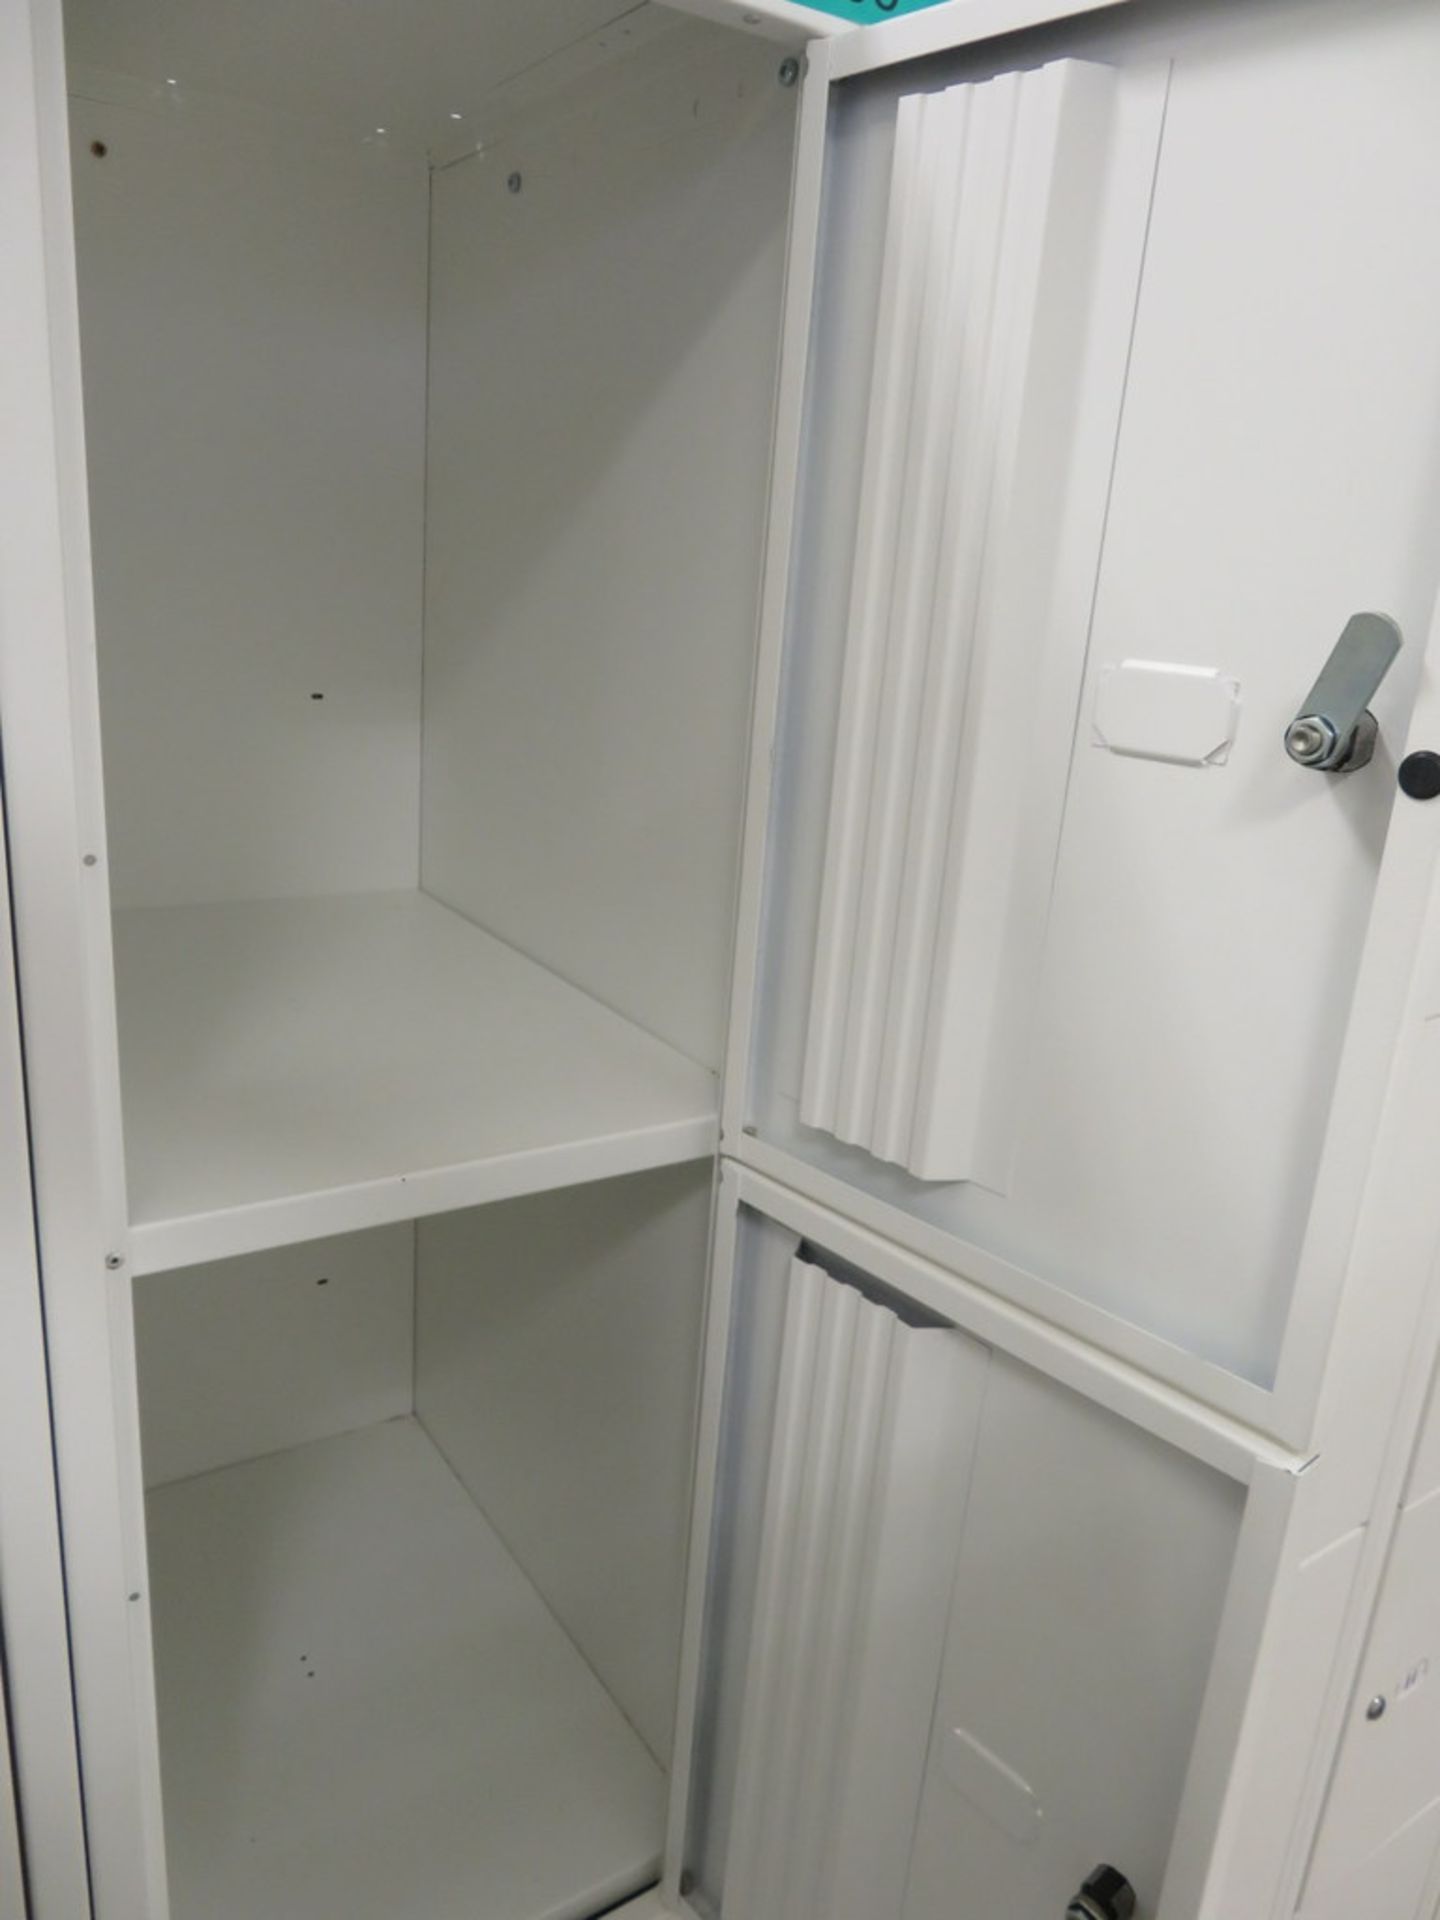 2x Bisley 4 Compartment Personnel Locker. - Image 3 of 3